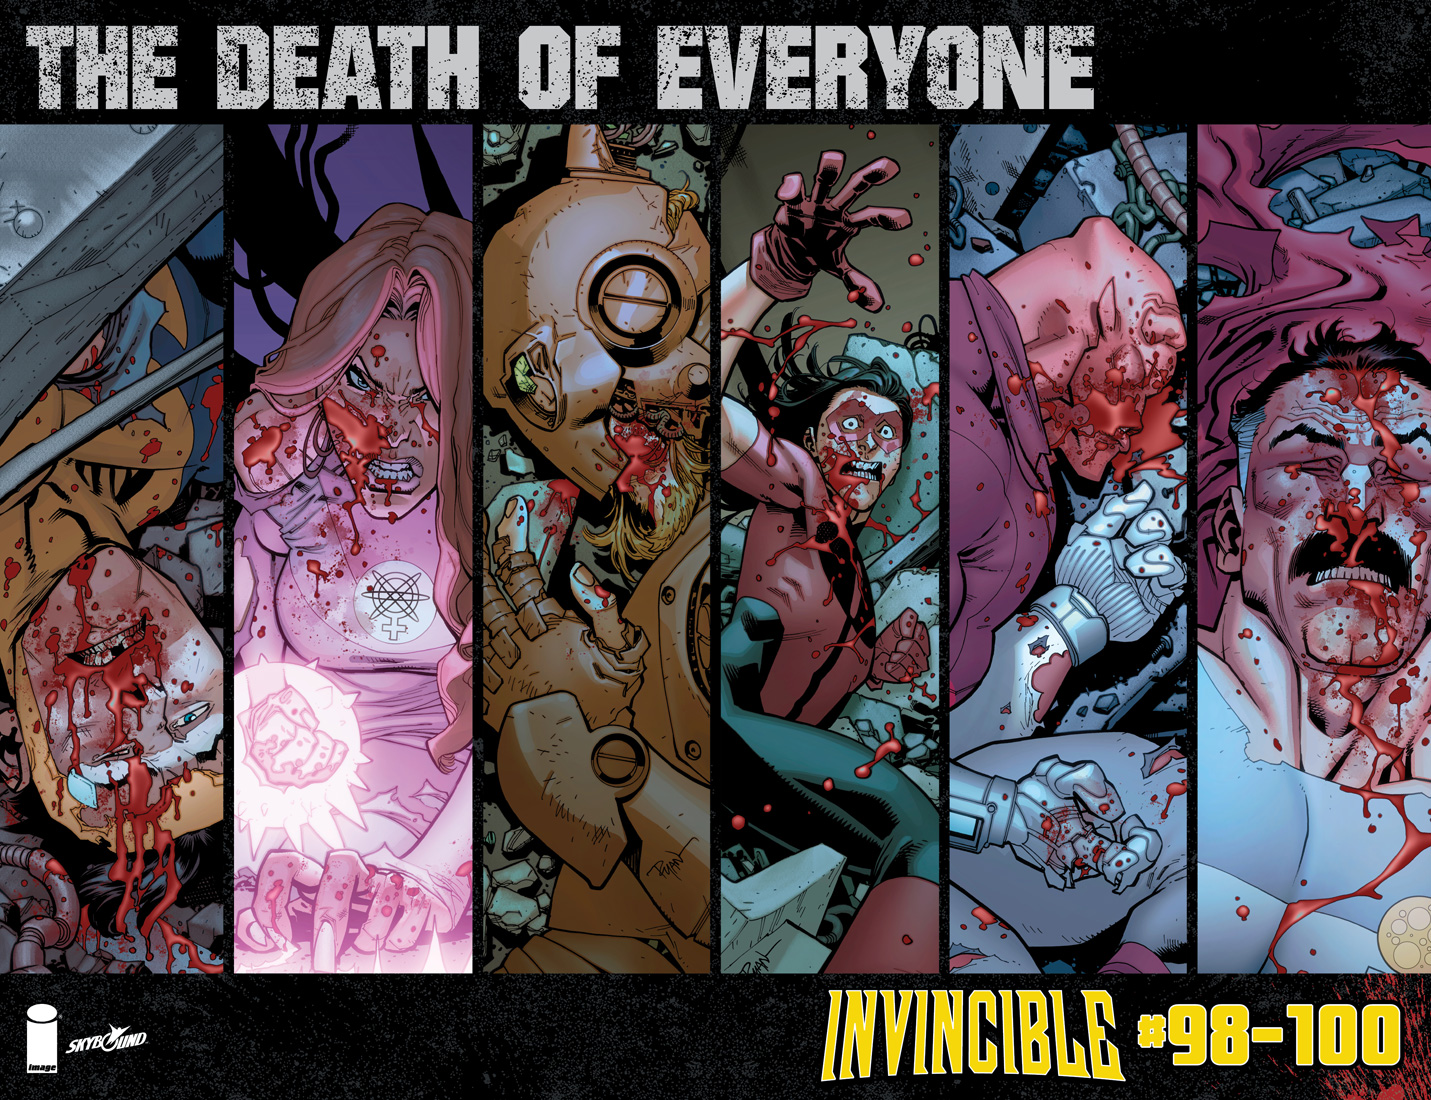 INVINCIBLE #98-100: THE DEATH OF EVERYONE!